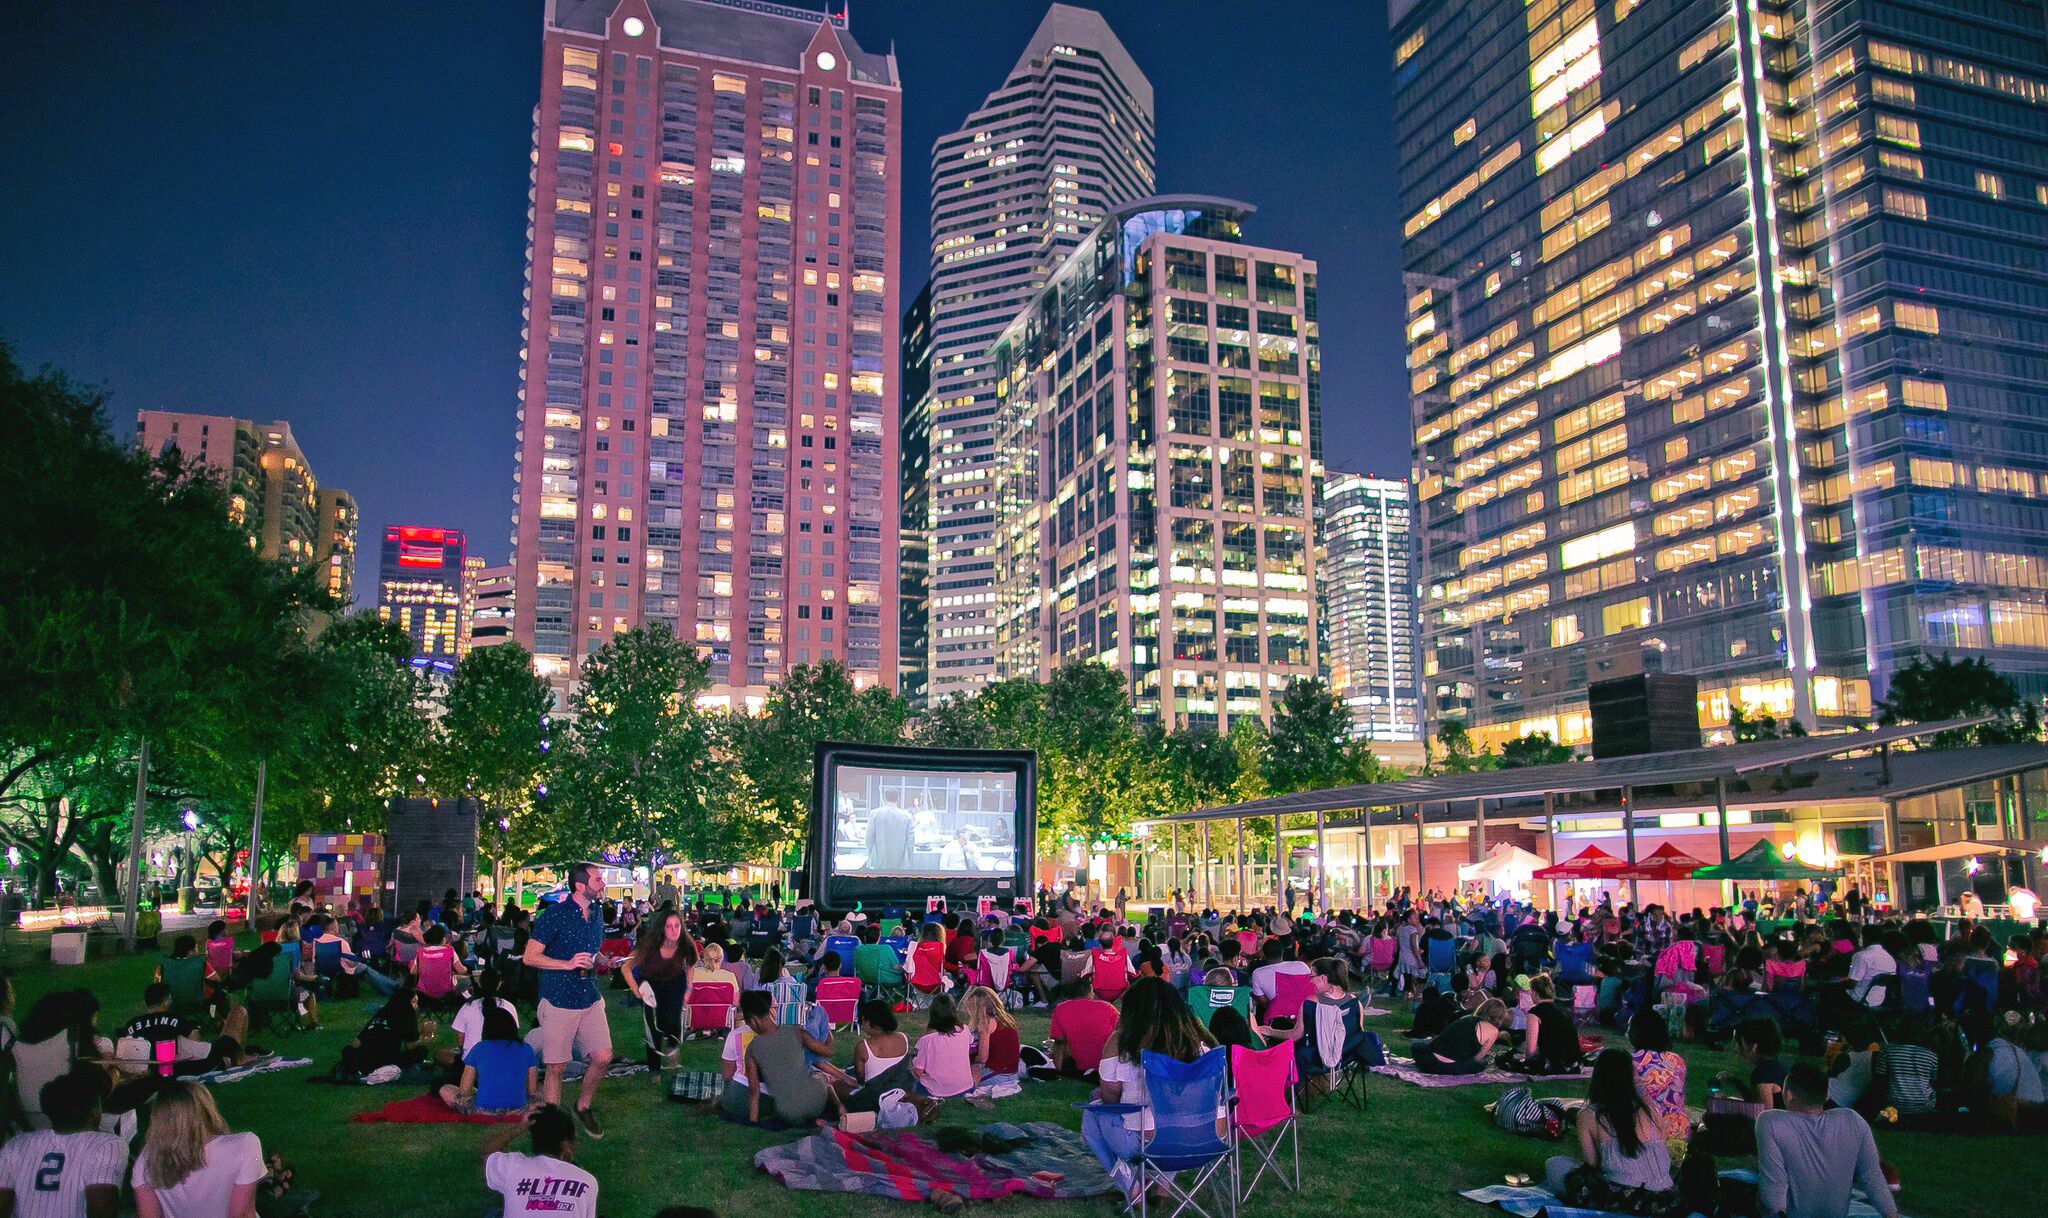 5 Things in Downtown Houston to Do with Family Over the Holidays